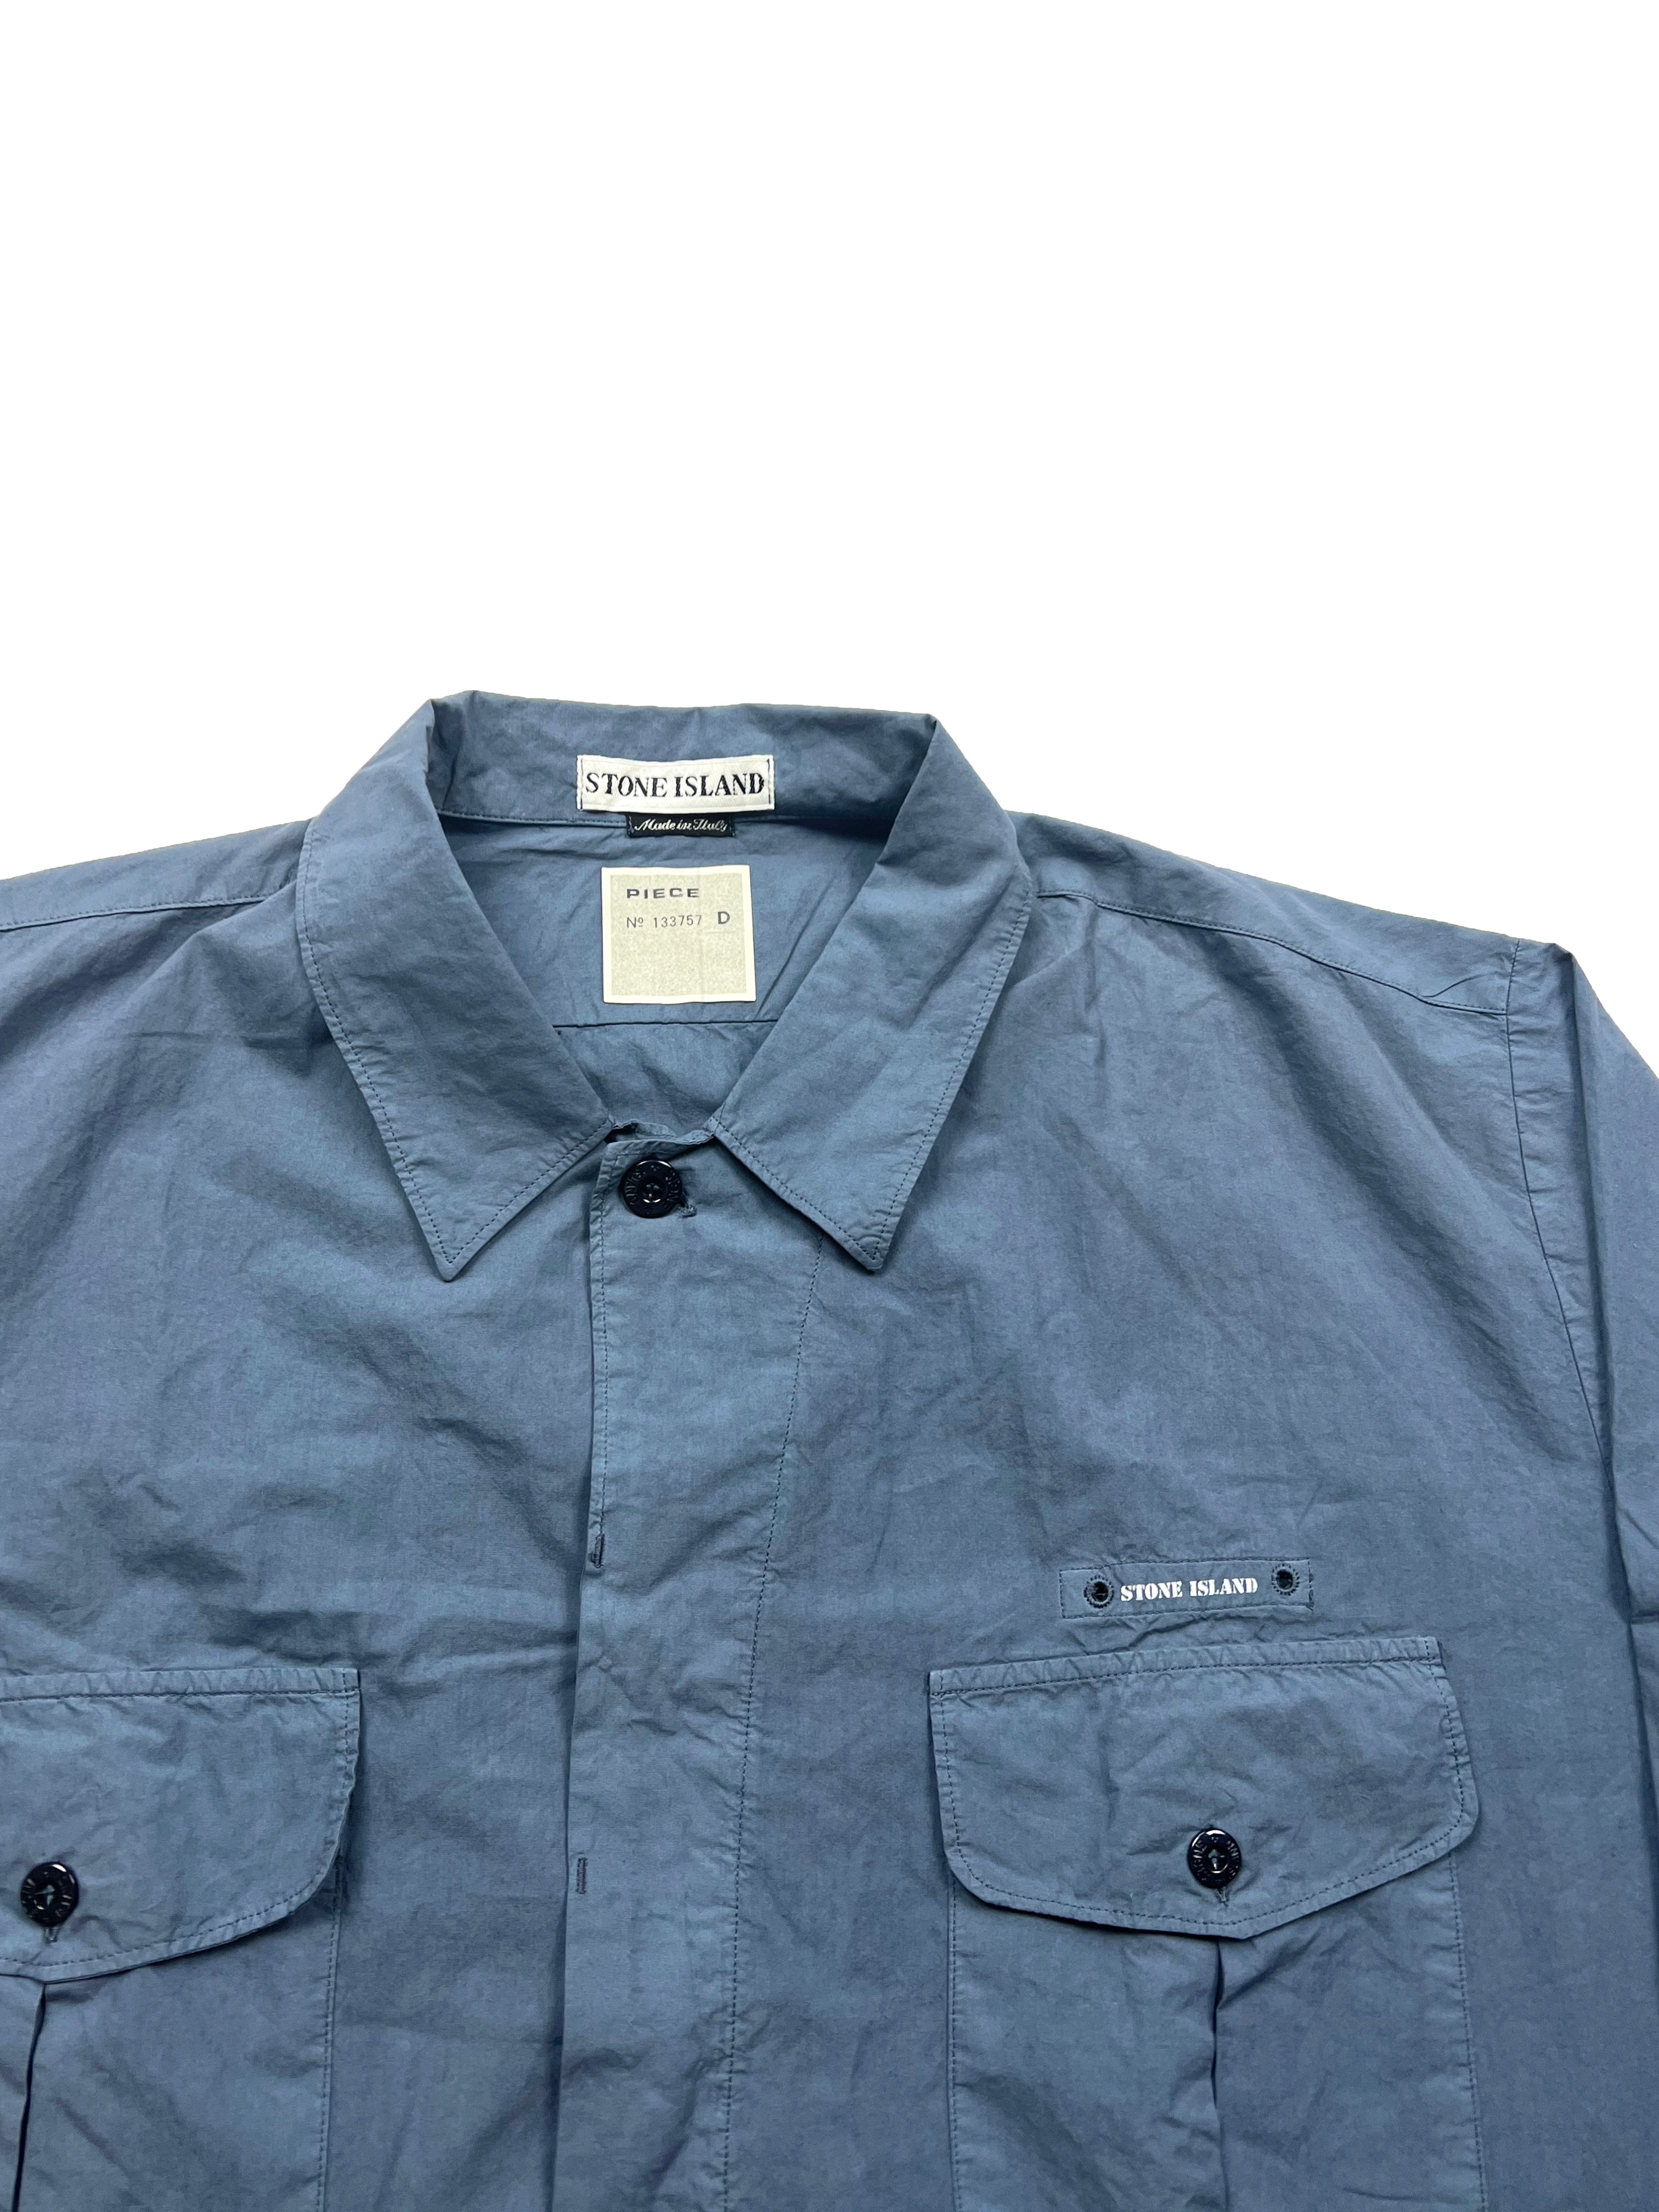 Stone island Light Blue Spell Out Overshirt 1998